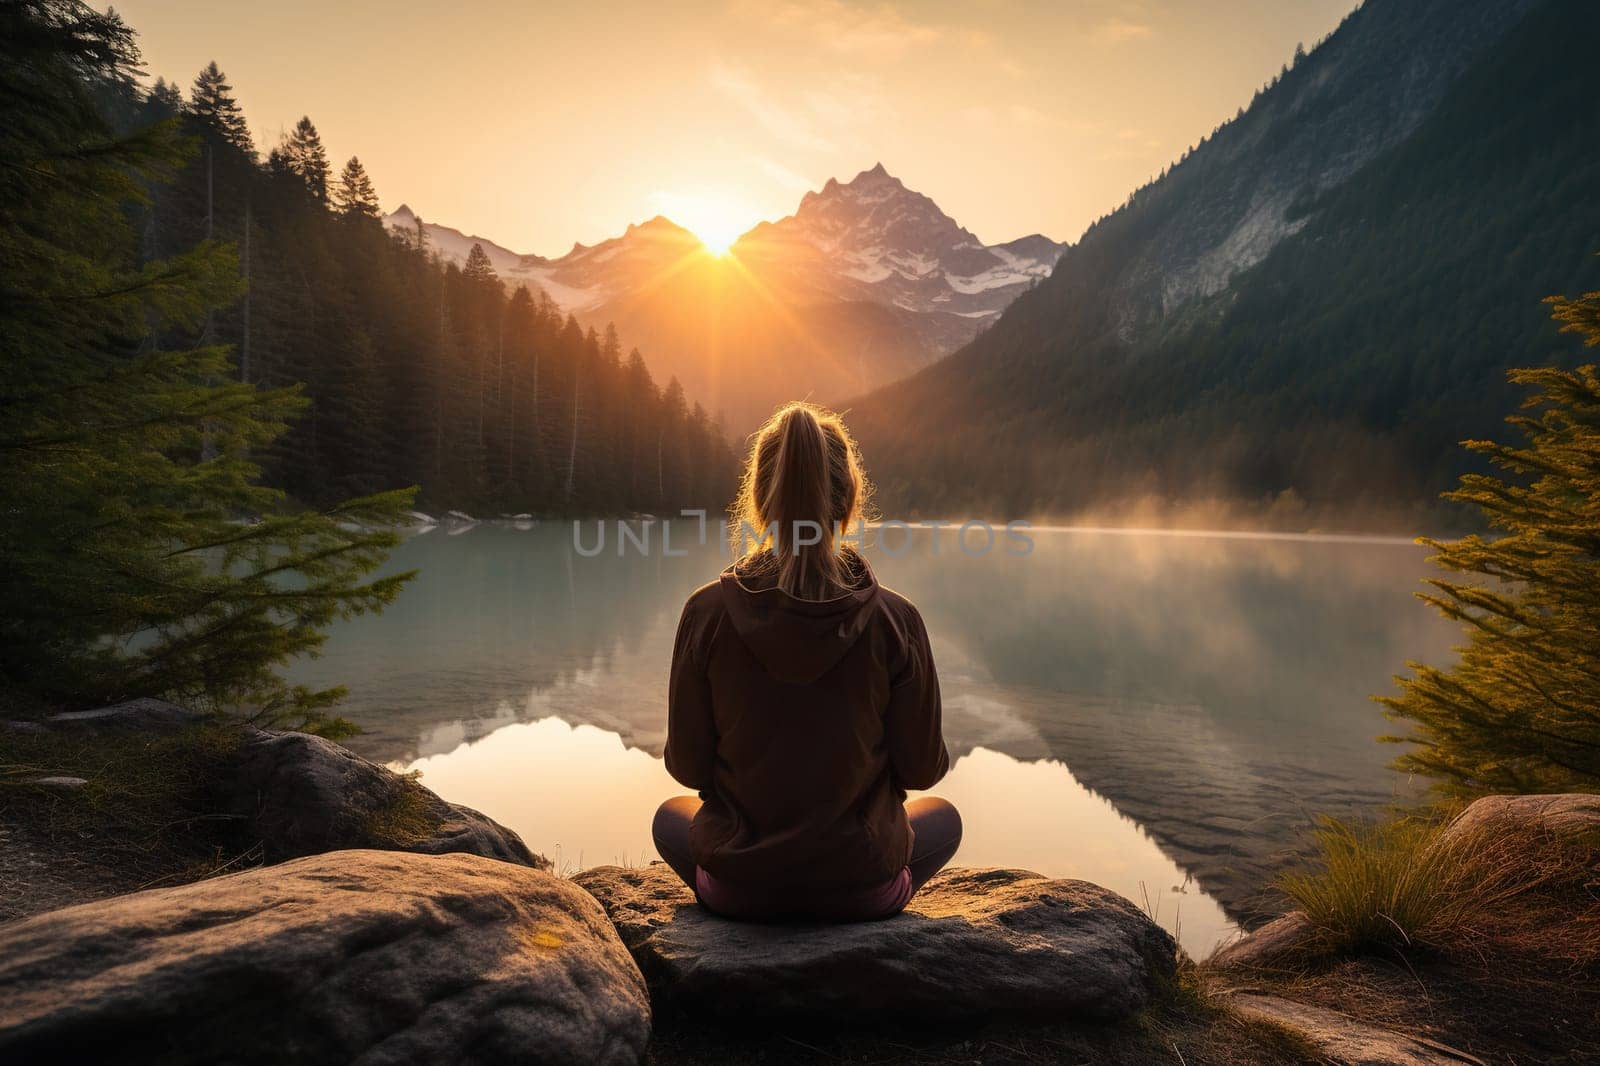 A girl sits on a stone in the lotus position looking at the mountains.